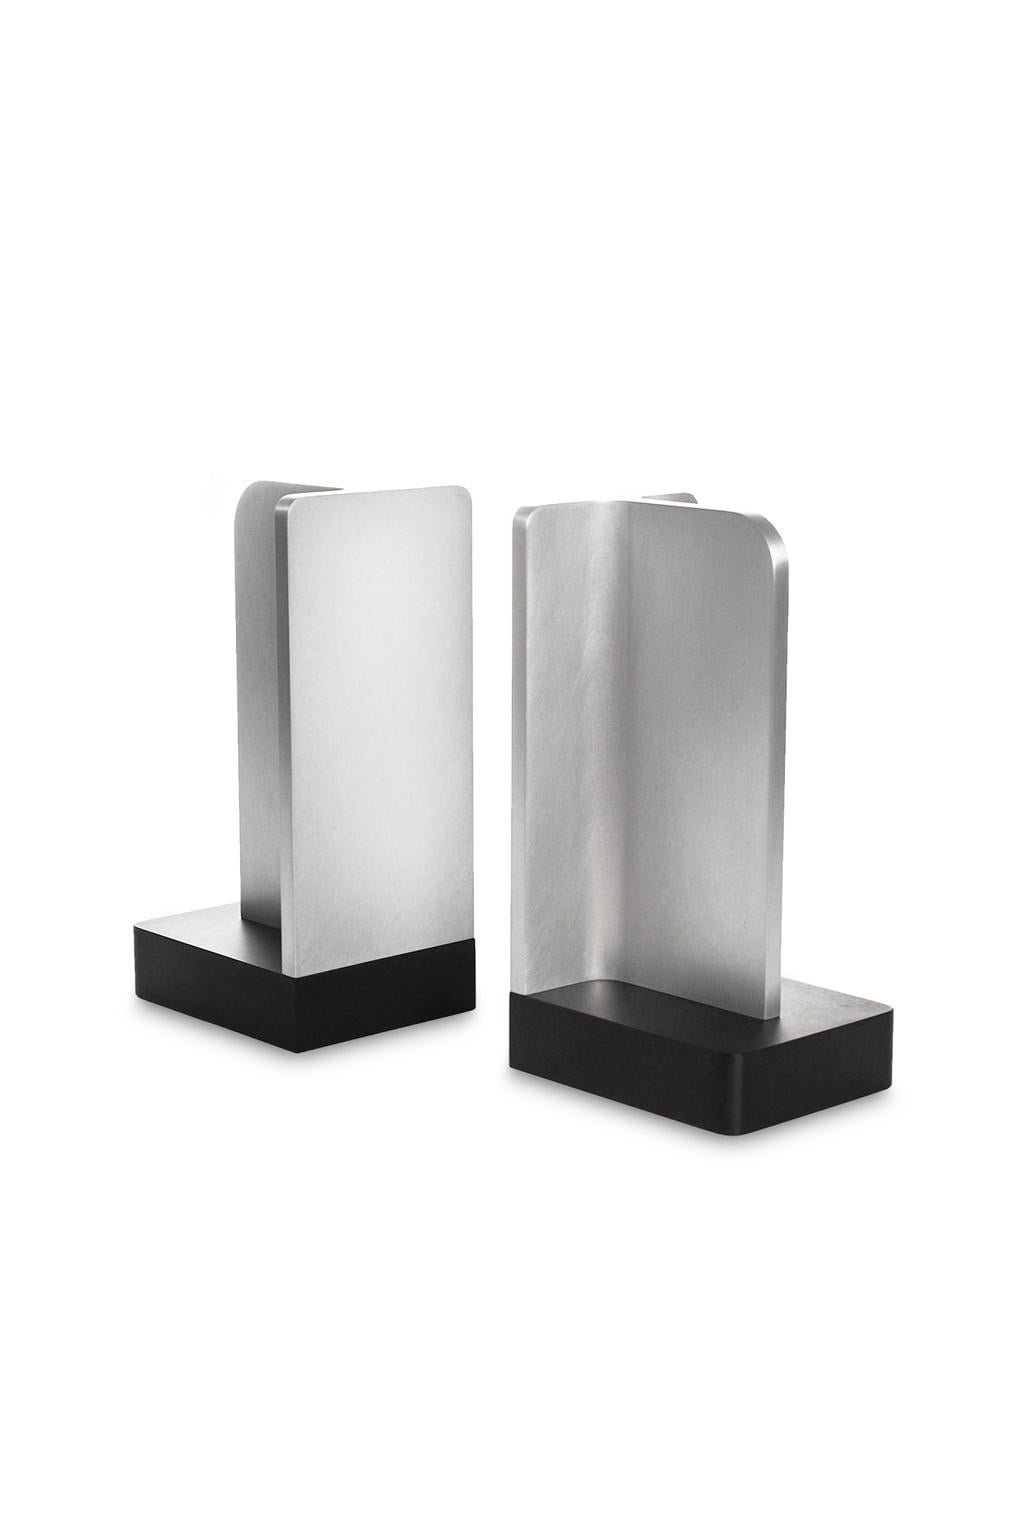 Collection I: Sculptural bookends

Architectural forms, minimalist design, and Machine Age simplicity inform these statuesque bookends.

Each purchase includes a pair of bookends.

Dimensions:
8.75” H x 4” W x 5” D

Made to order.